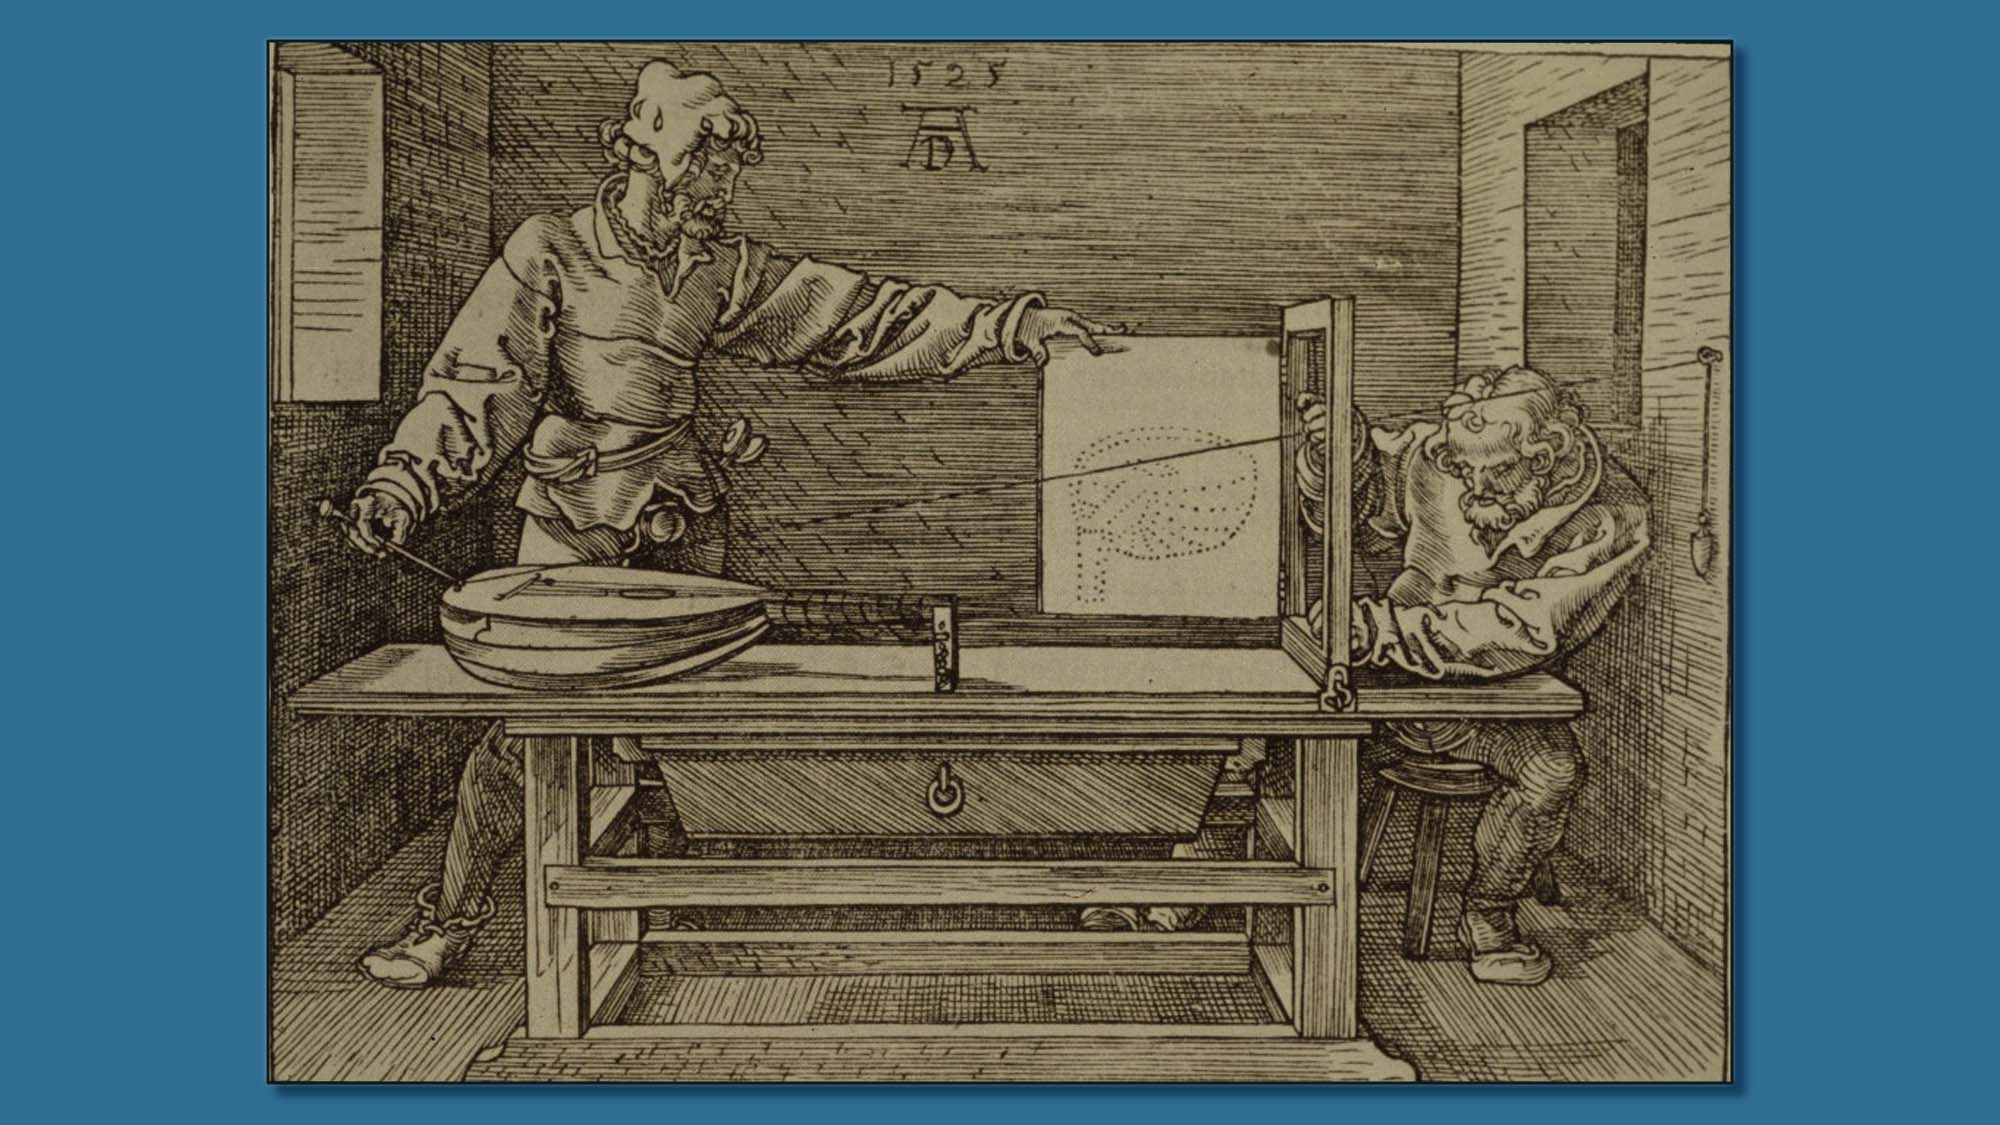 An artist and apprentice use a taut string and perspectival window to draw a foreshortened image of a lute.